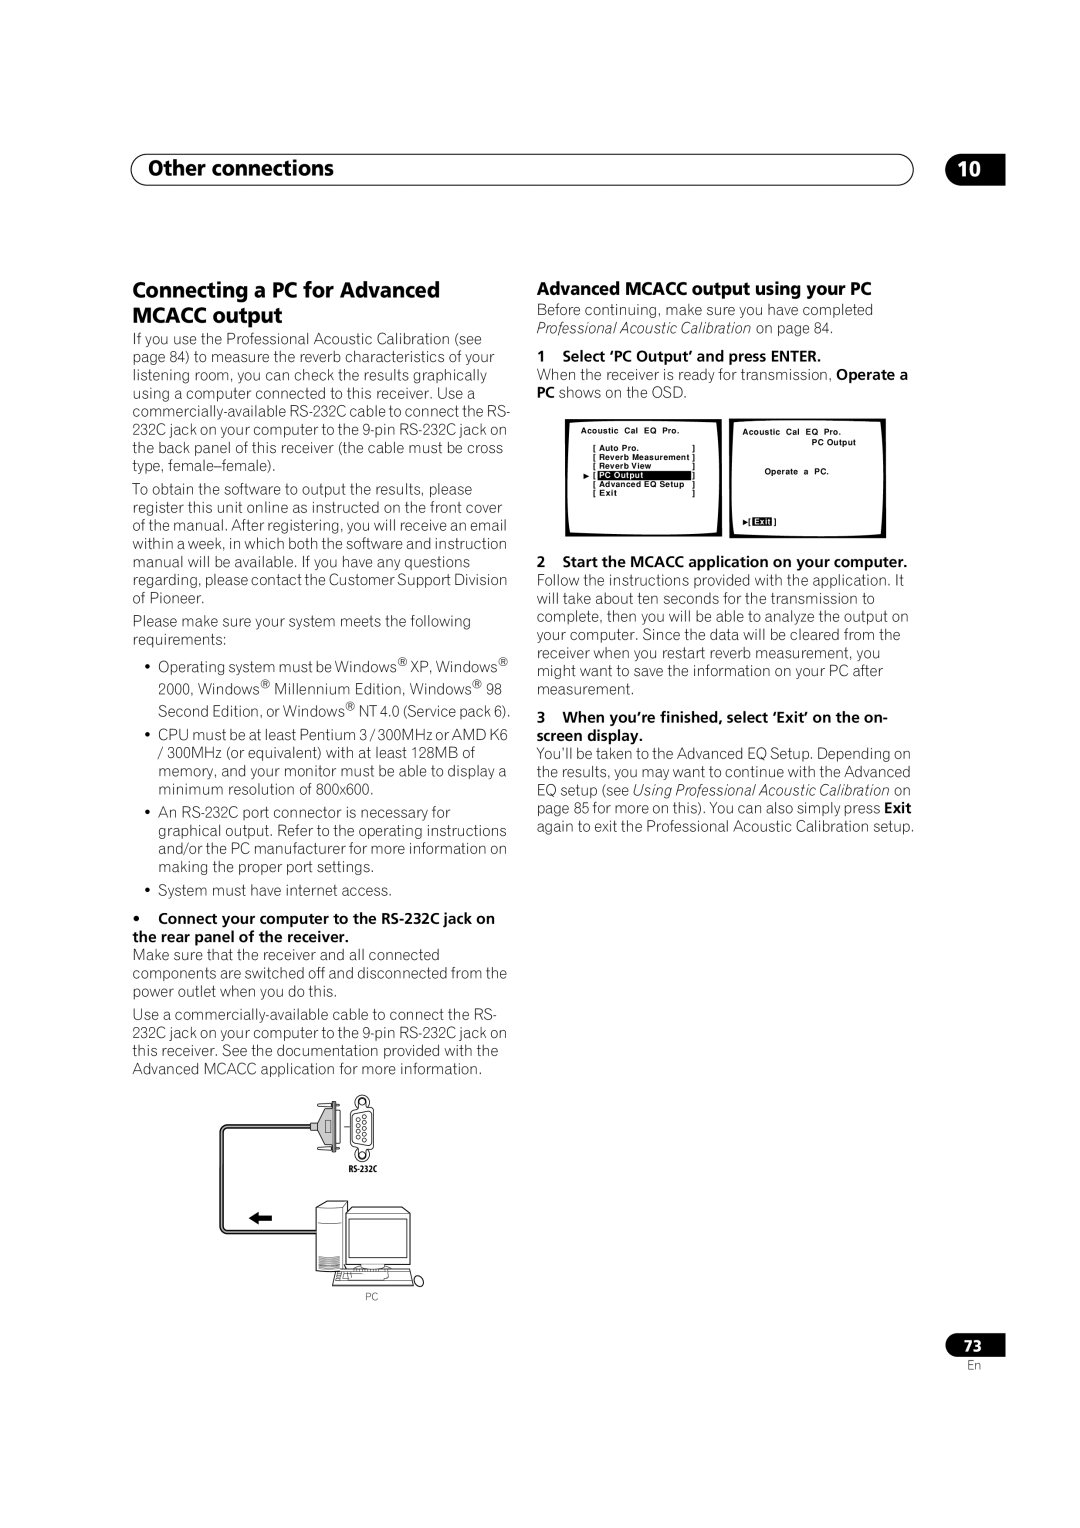 Pioneer VSX-9300TX manual Other connections, Connecting a PC for Advanced MCACC output, Advanced MCACC output using your PC 